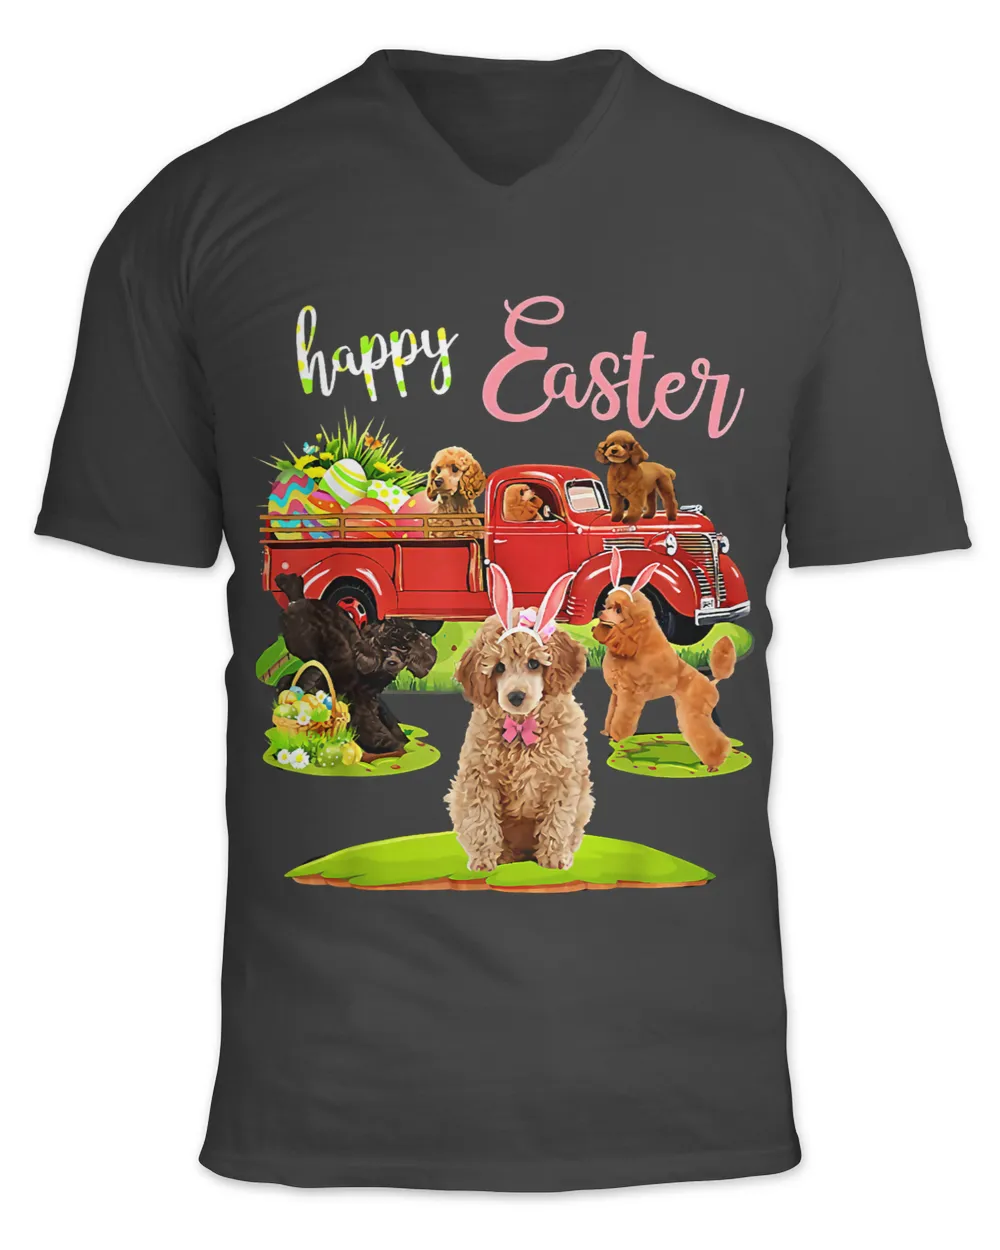 Poodles Easter Day Riding Red Truck Funny Love Bunny Eggs 119 Poodle dog